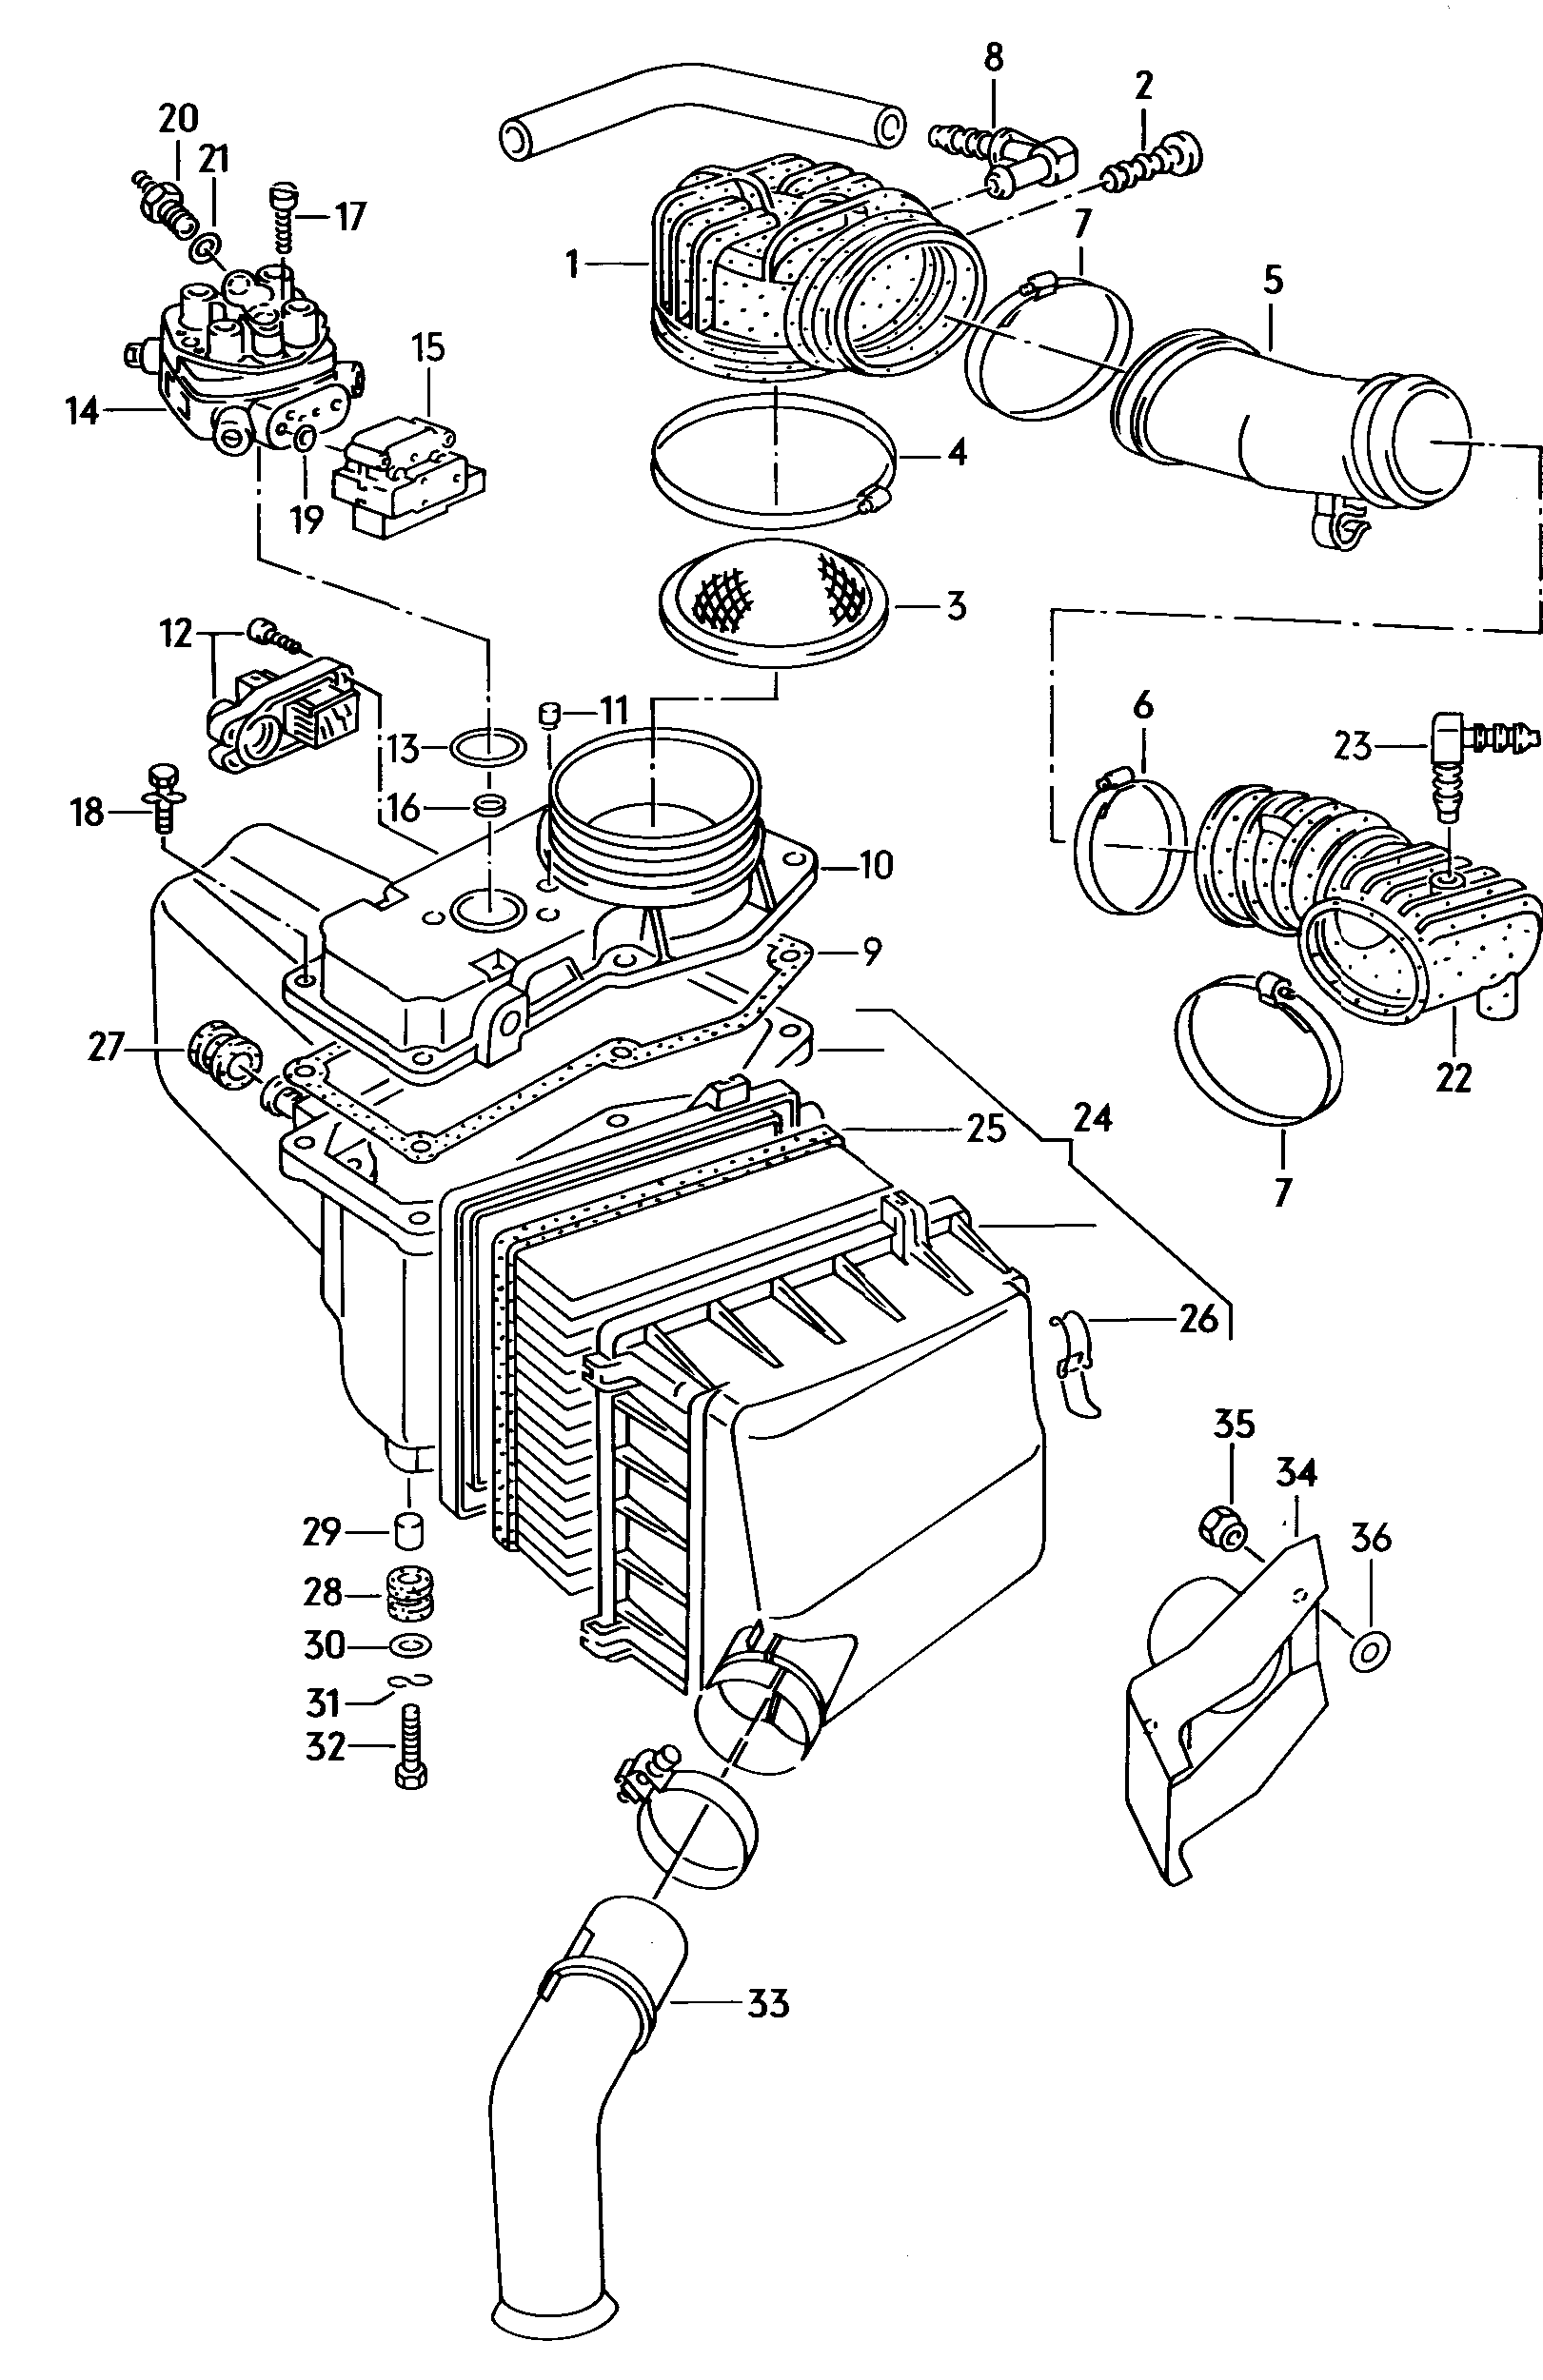 air flow meterfuel metering valveAir filter with connecting<br>parts 1.8ltr. - Audi 100/Avant - a100